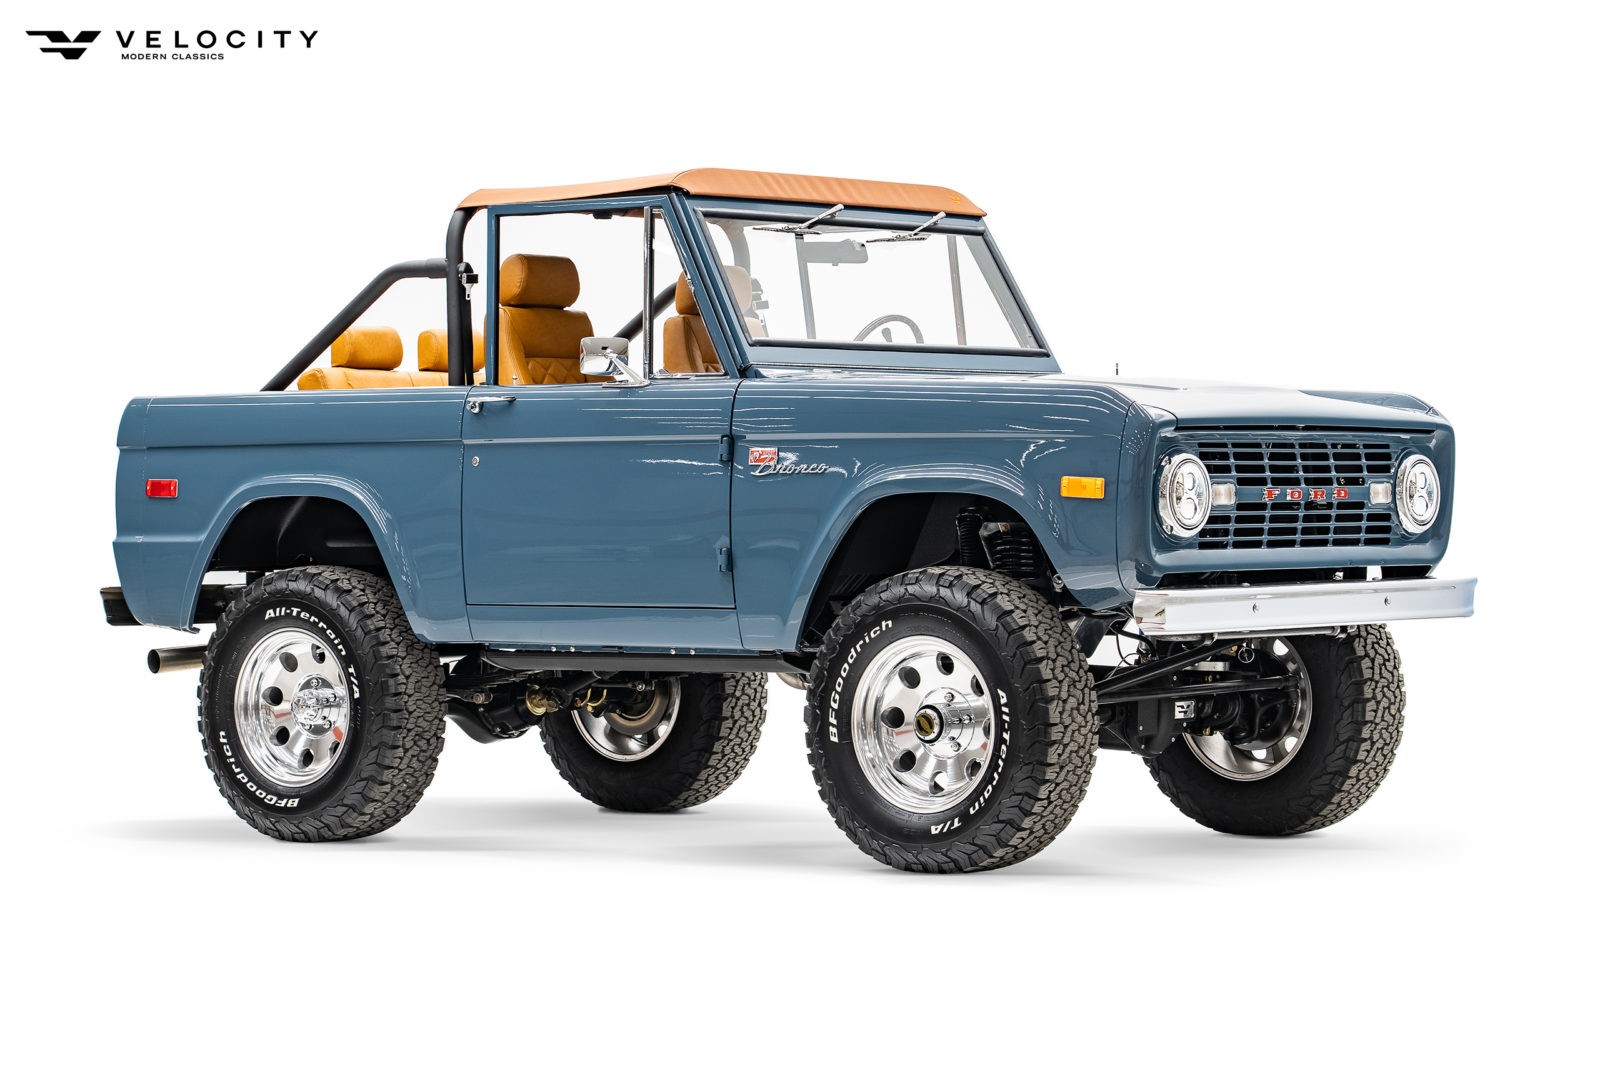 A classic Ford Bronco.